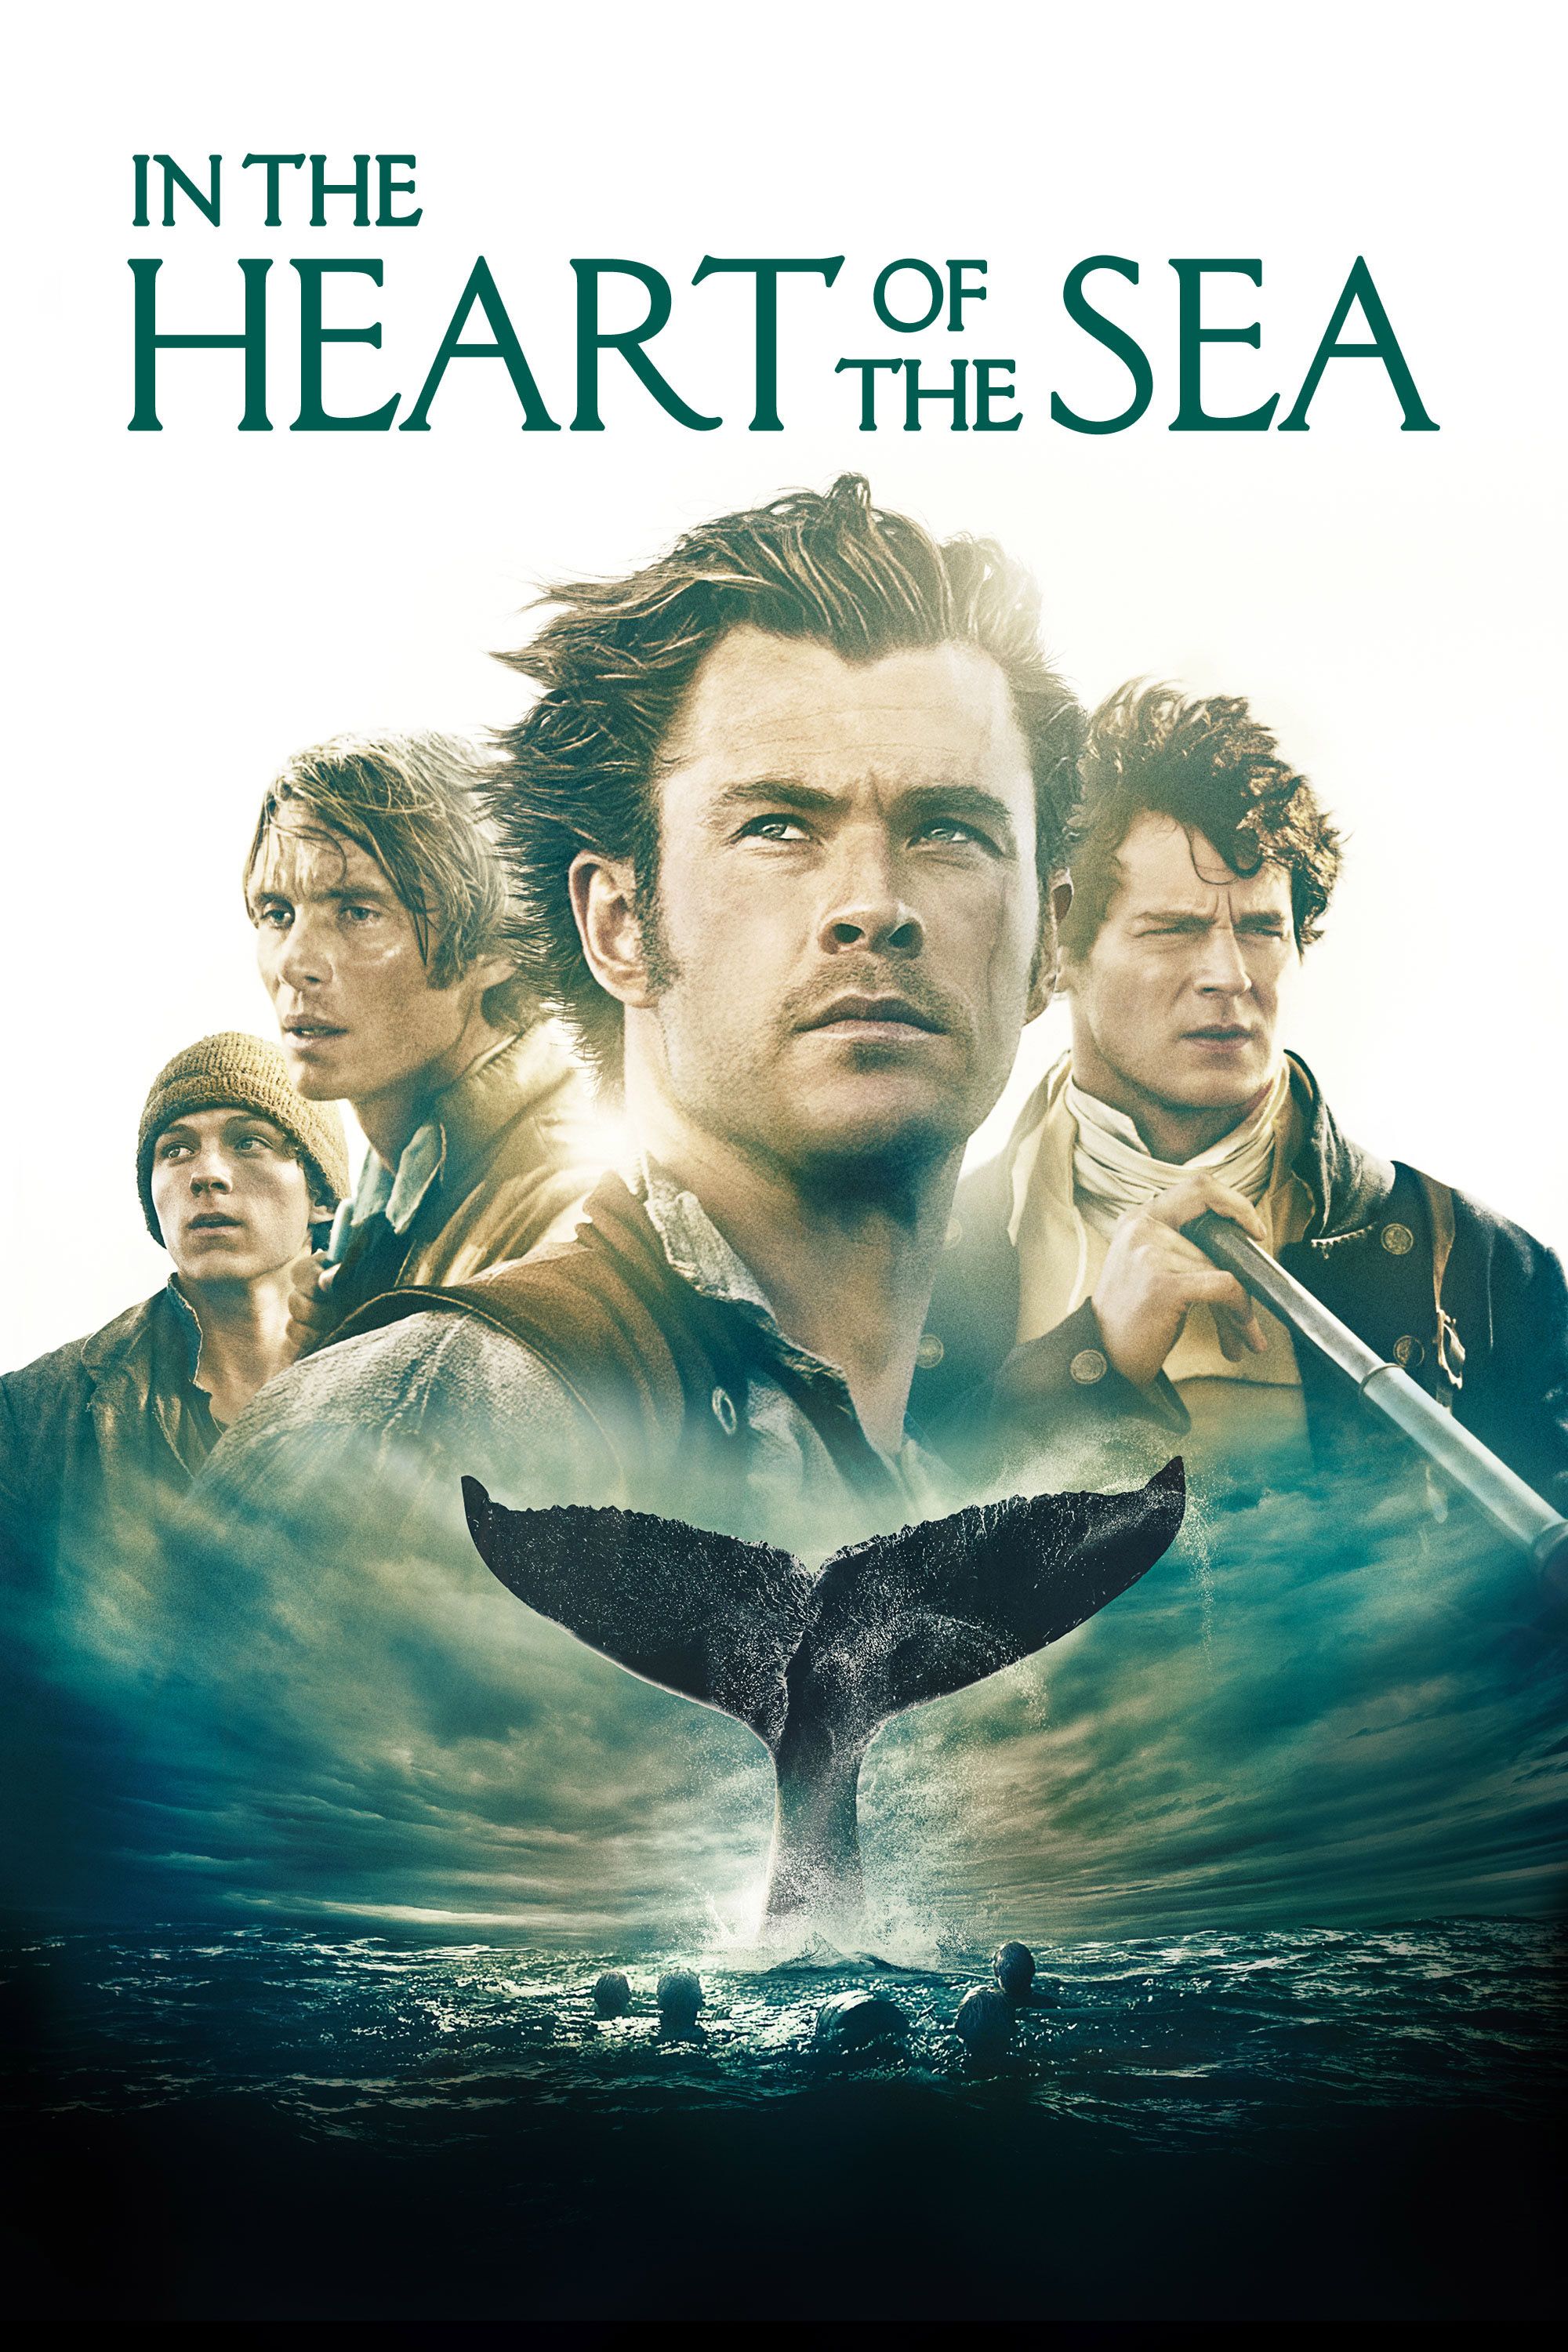 In The Heart Of The Sea 2015 Full Movie Online In Hd Quality